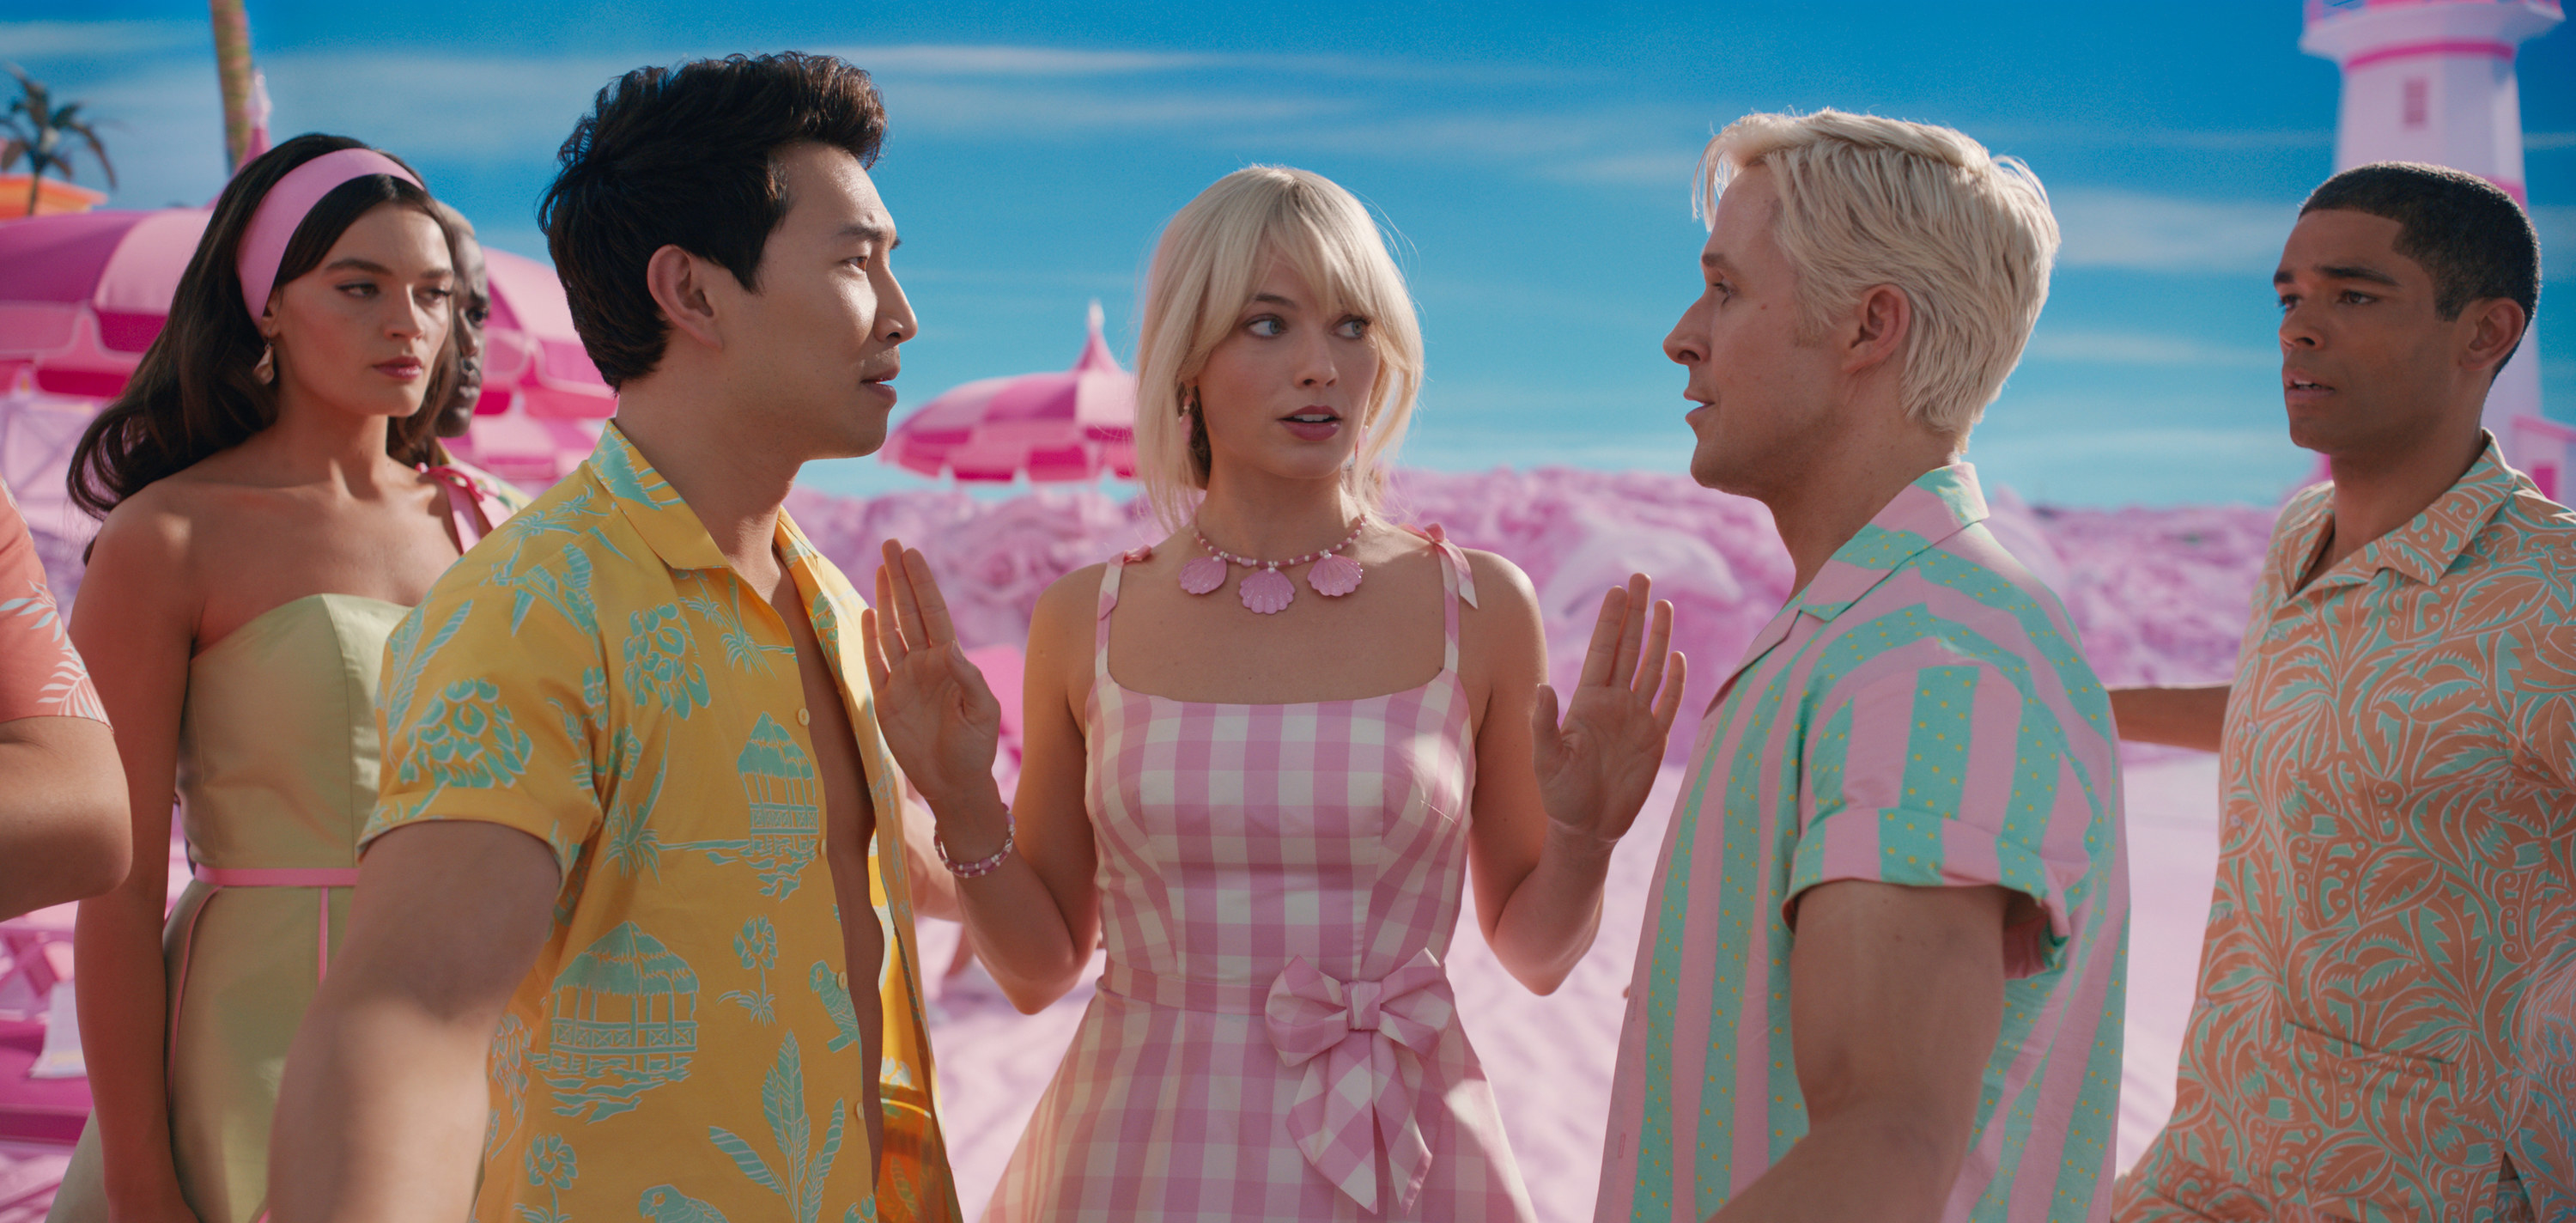 Margot as Barbie getting in-between Simu and Ryan as they argue with Emma Mackey and Kingsley Ben-Adir looking on